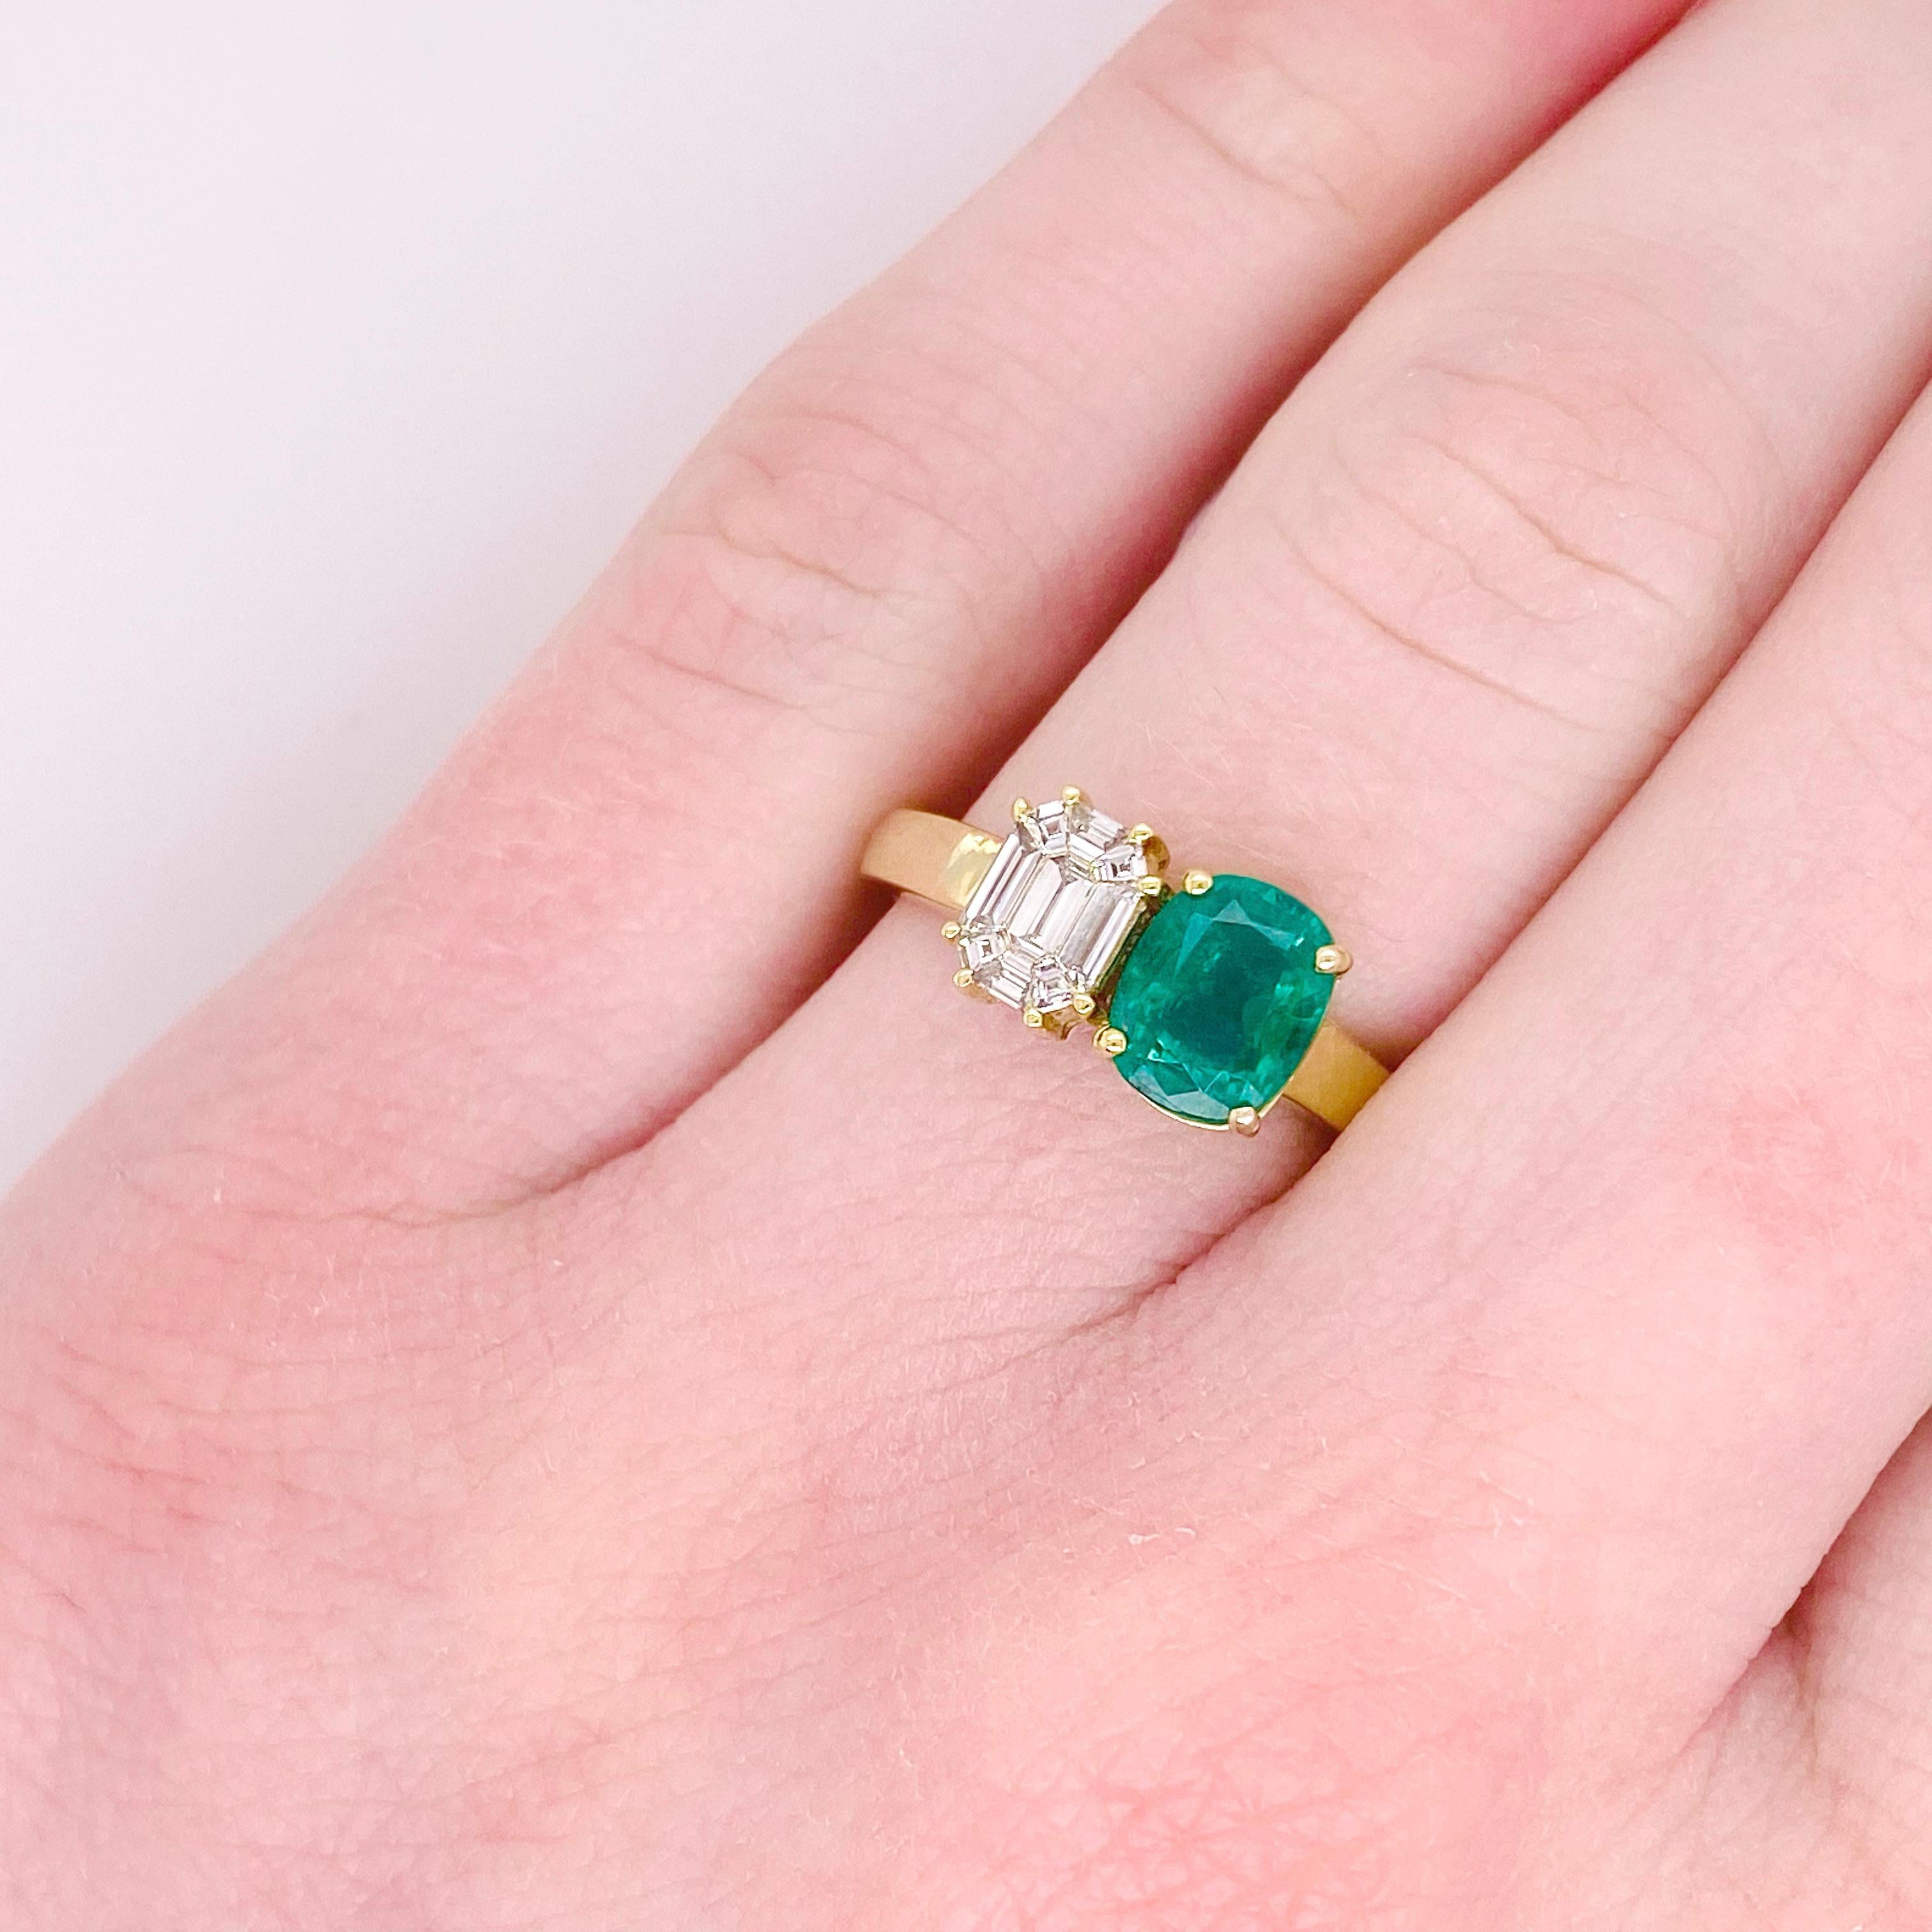 A vibrant emerald paired with a clean emerald cut diamond is one of the most popular designs of 2022, largely promoted by Megan Fox's engagement ring. These stones partnered together make a beautiful design perfect for a modern engagement ring or a